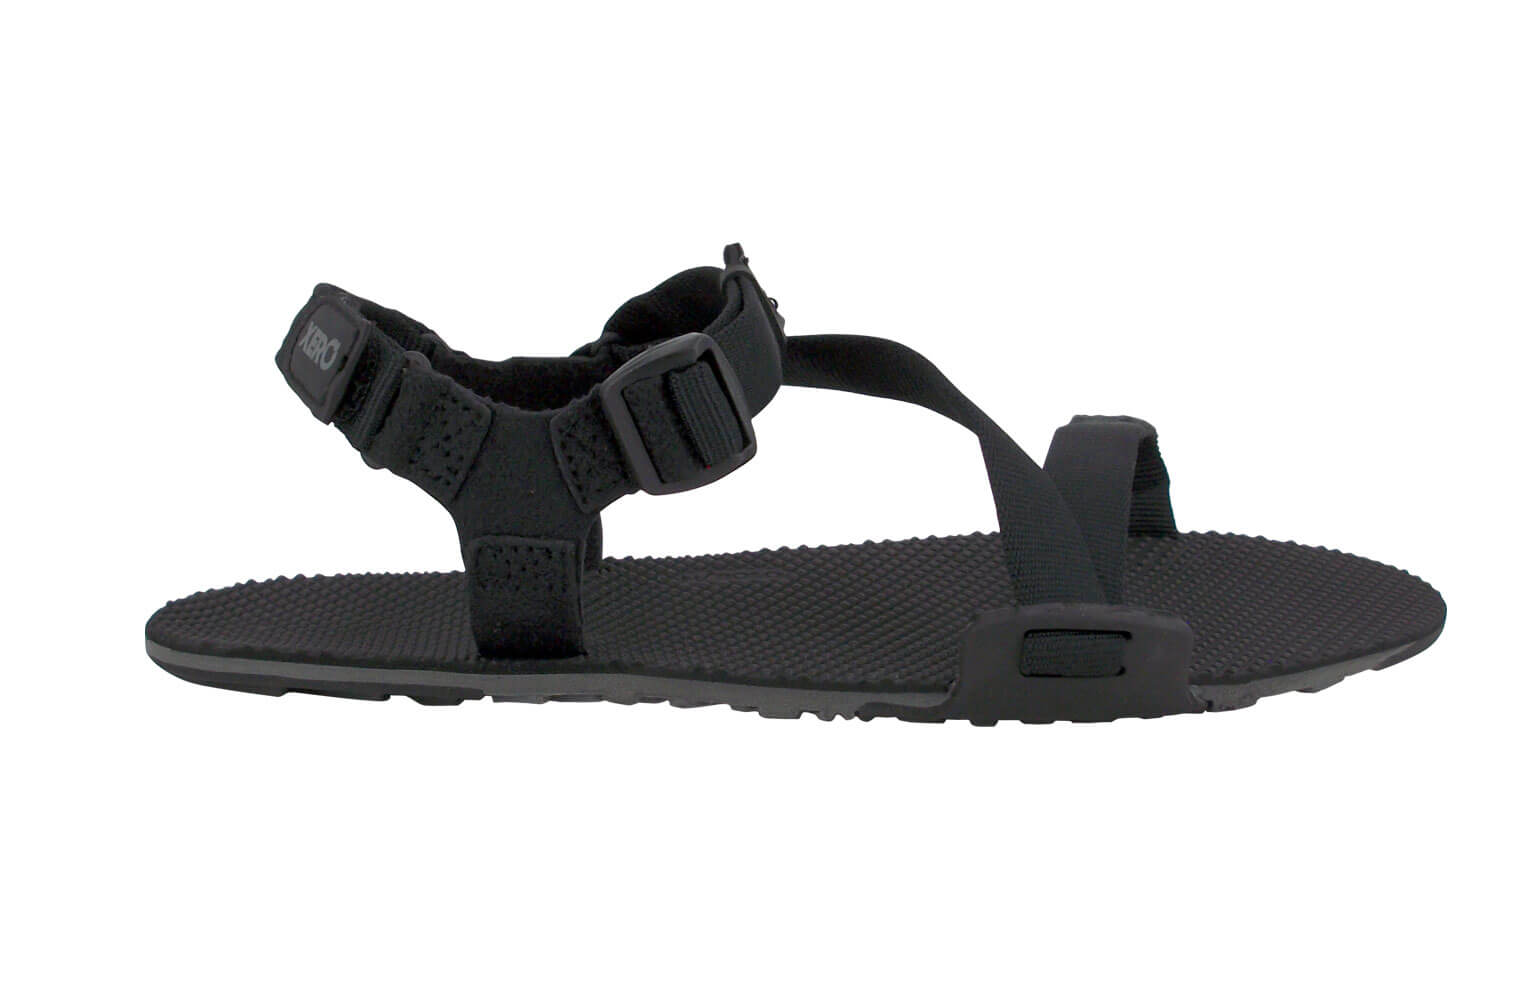 Foot Stimulating Naboso Trail Sport Sandal from Xero Shoes